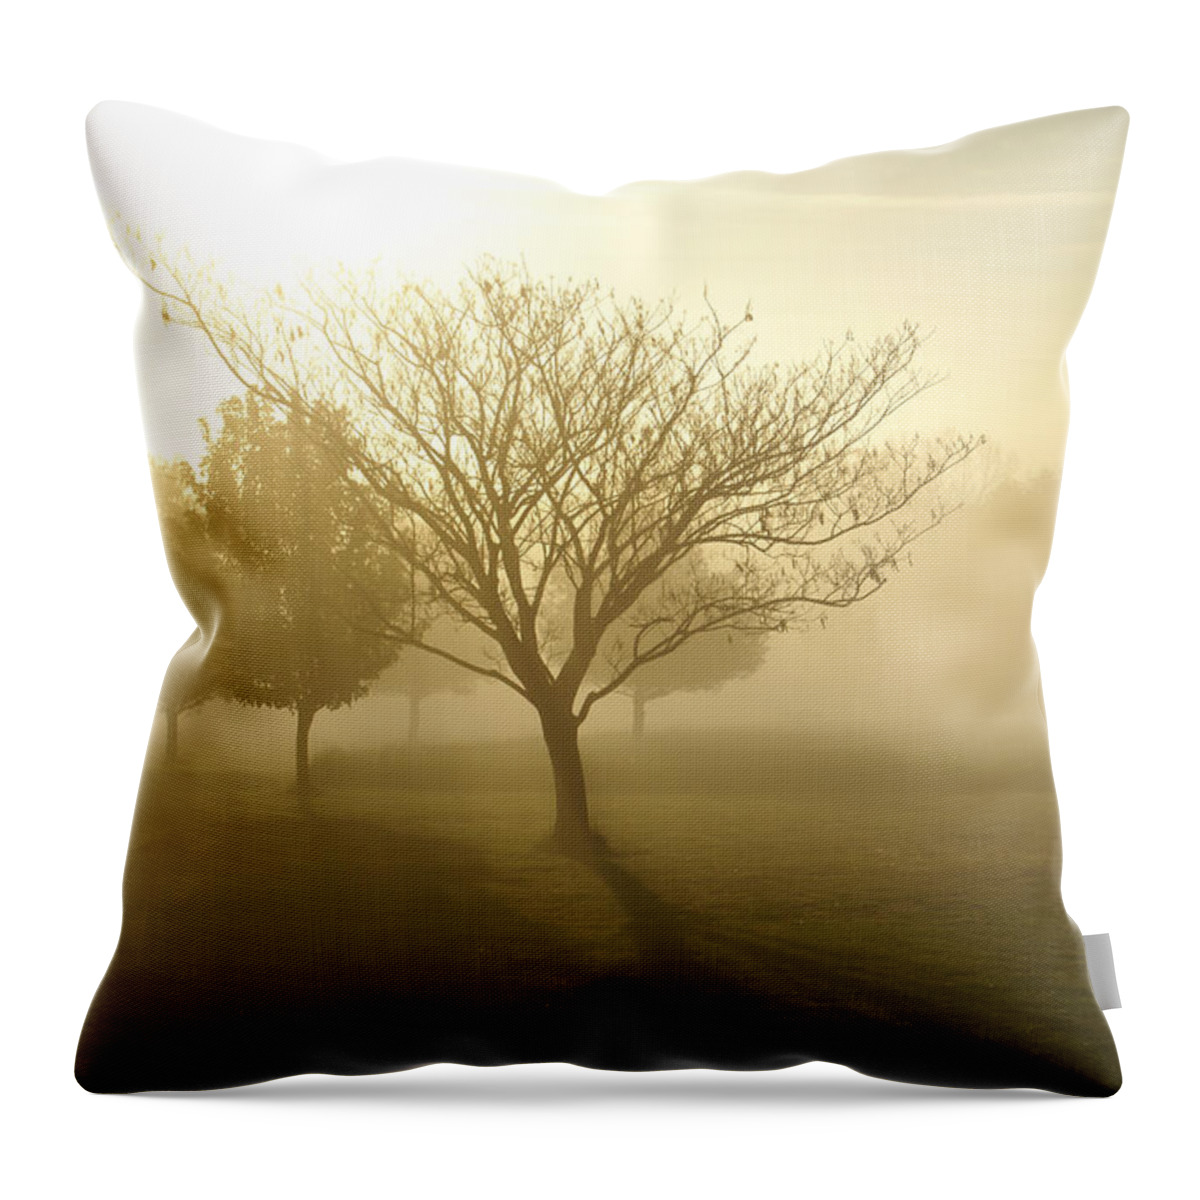 Fog Throw Pillow featuring the photograph Ozarks Misty Golden Morning Sunrise by Jennifer White